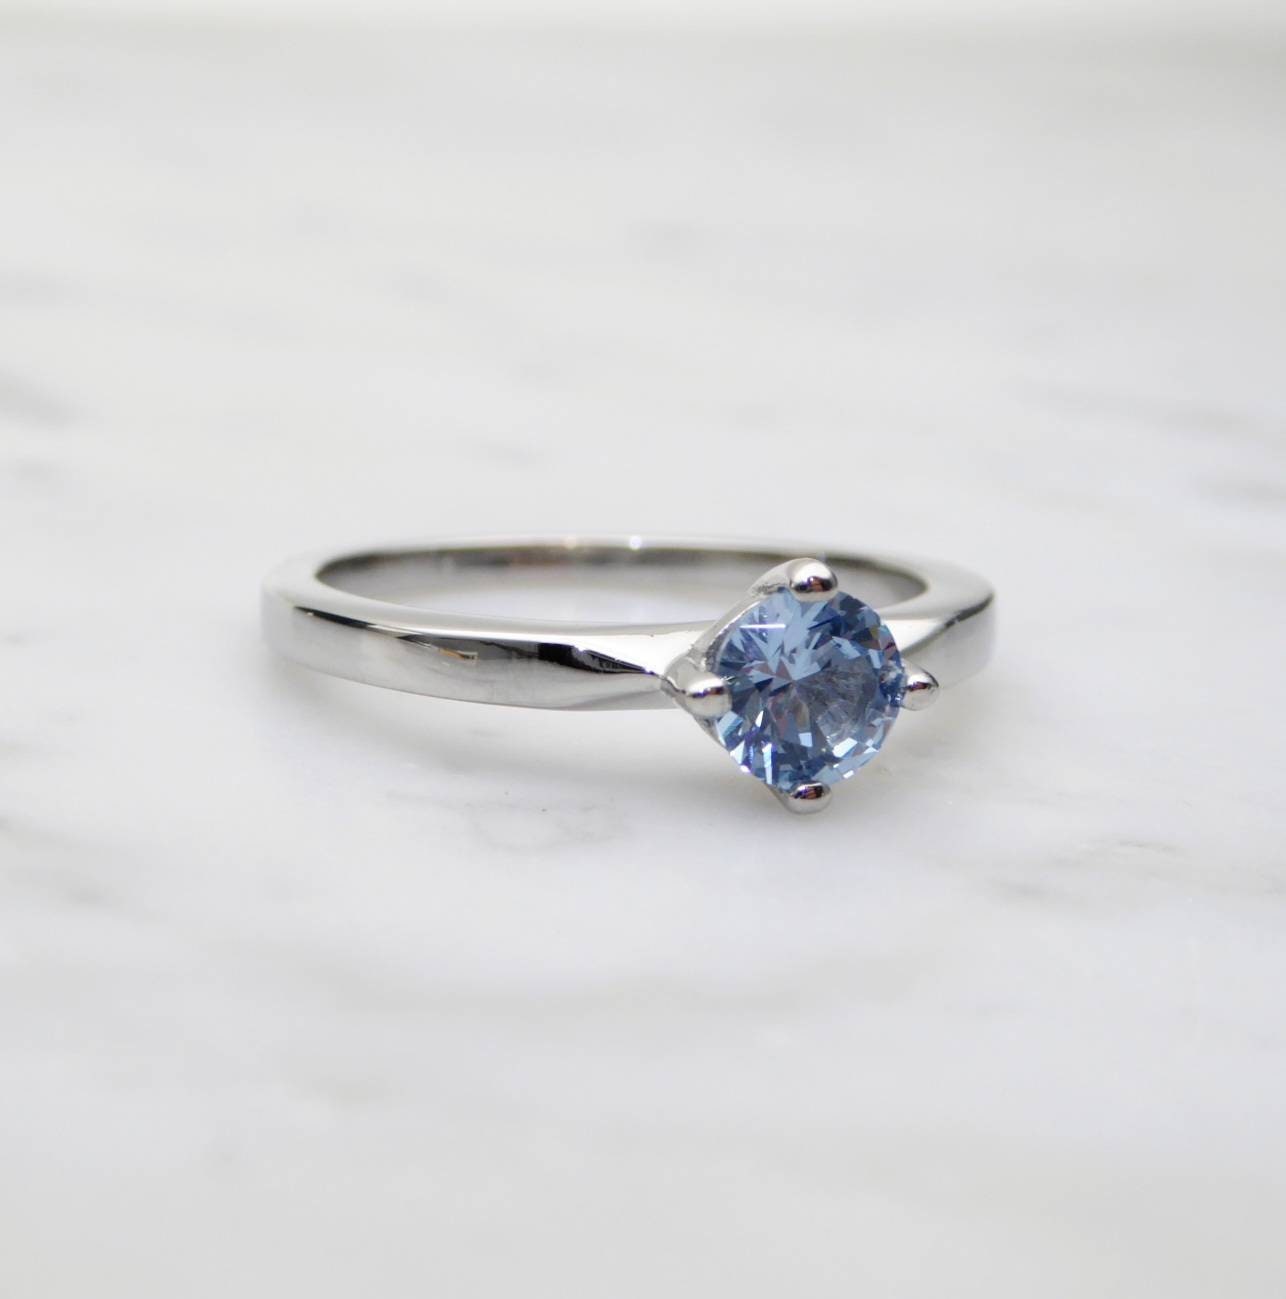 Natural Blue Topaz solitaire ring - available in titanium or white gold - engagement ring - wedding ring